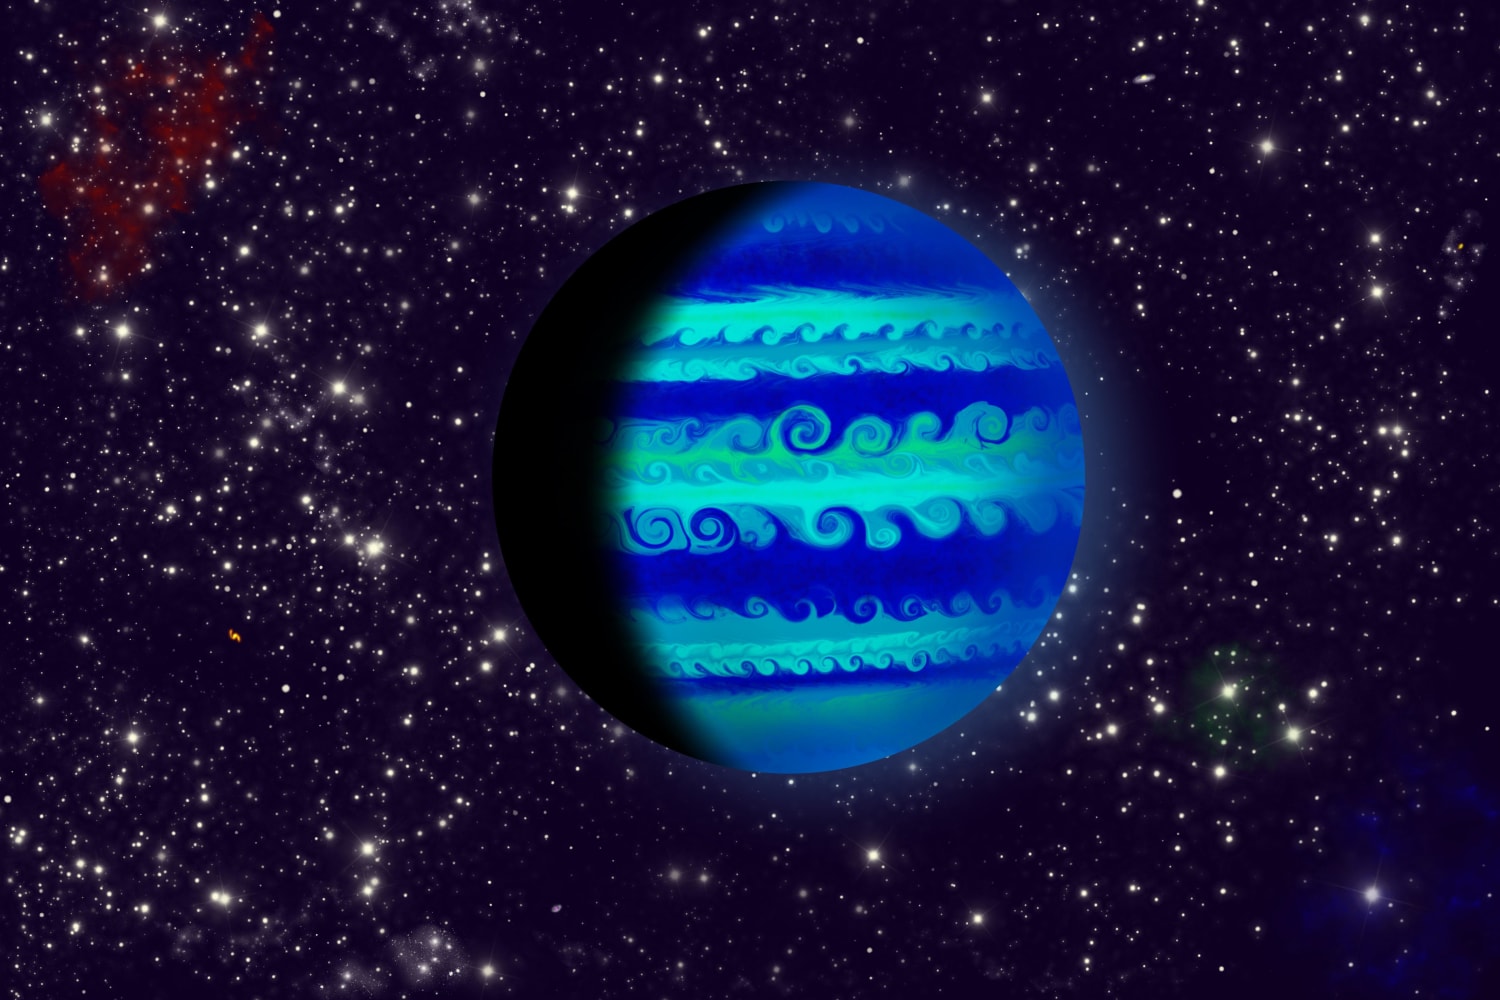 Big Blue the gas giant, by me!